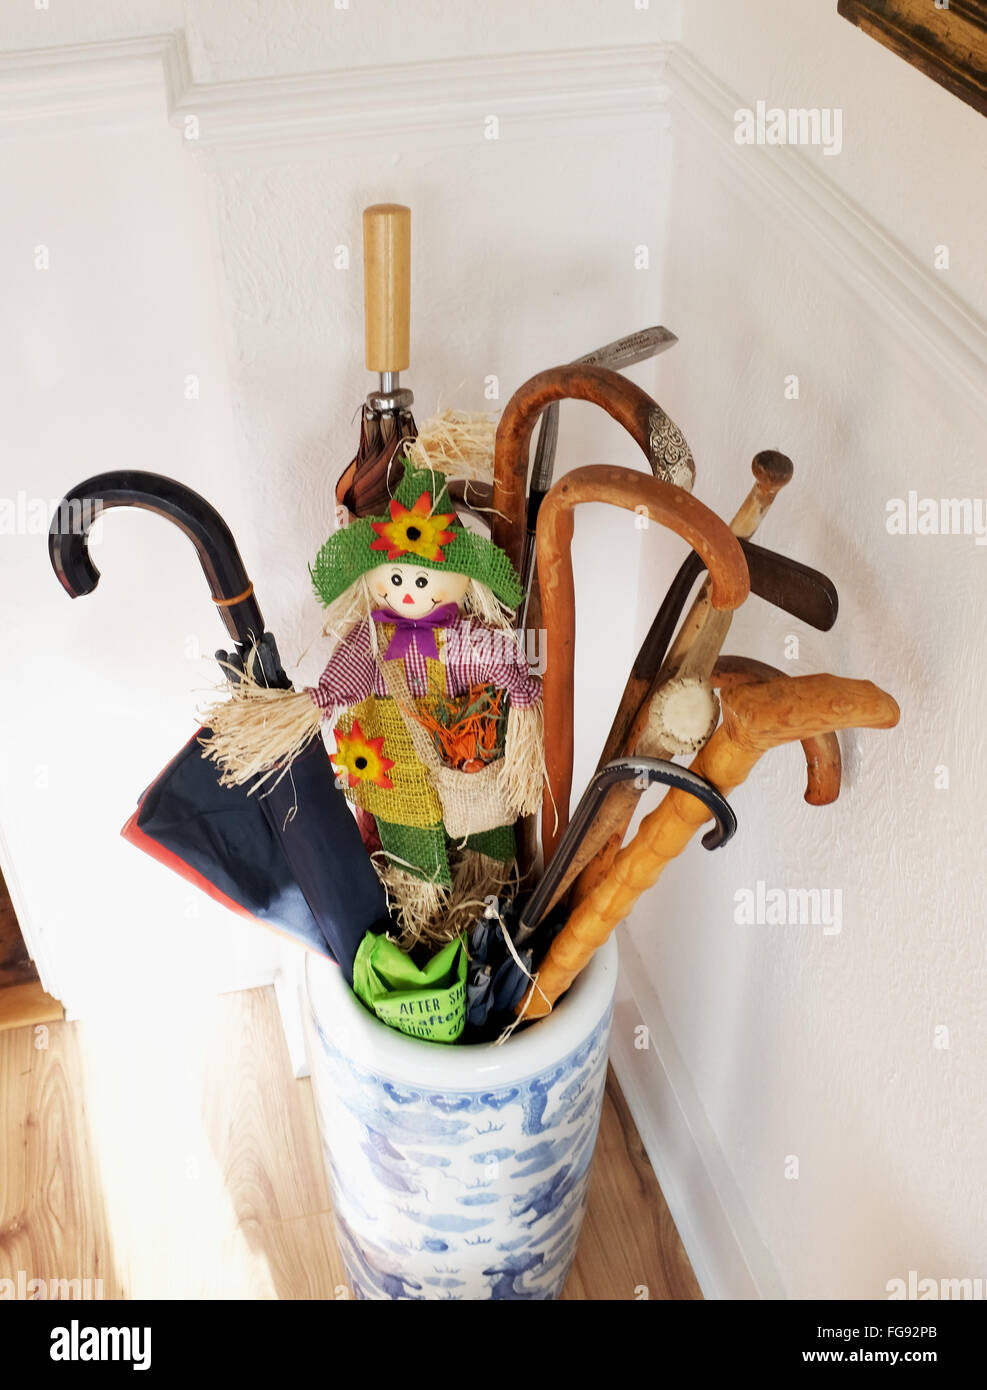 Walking sticks in a container in porch of a home Stock Photo